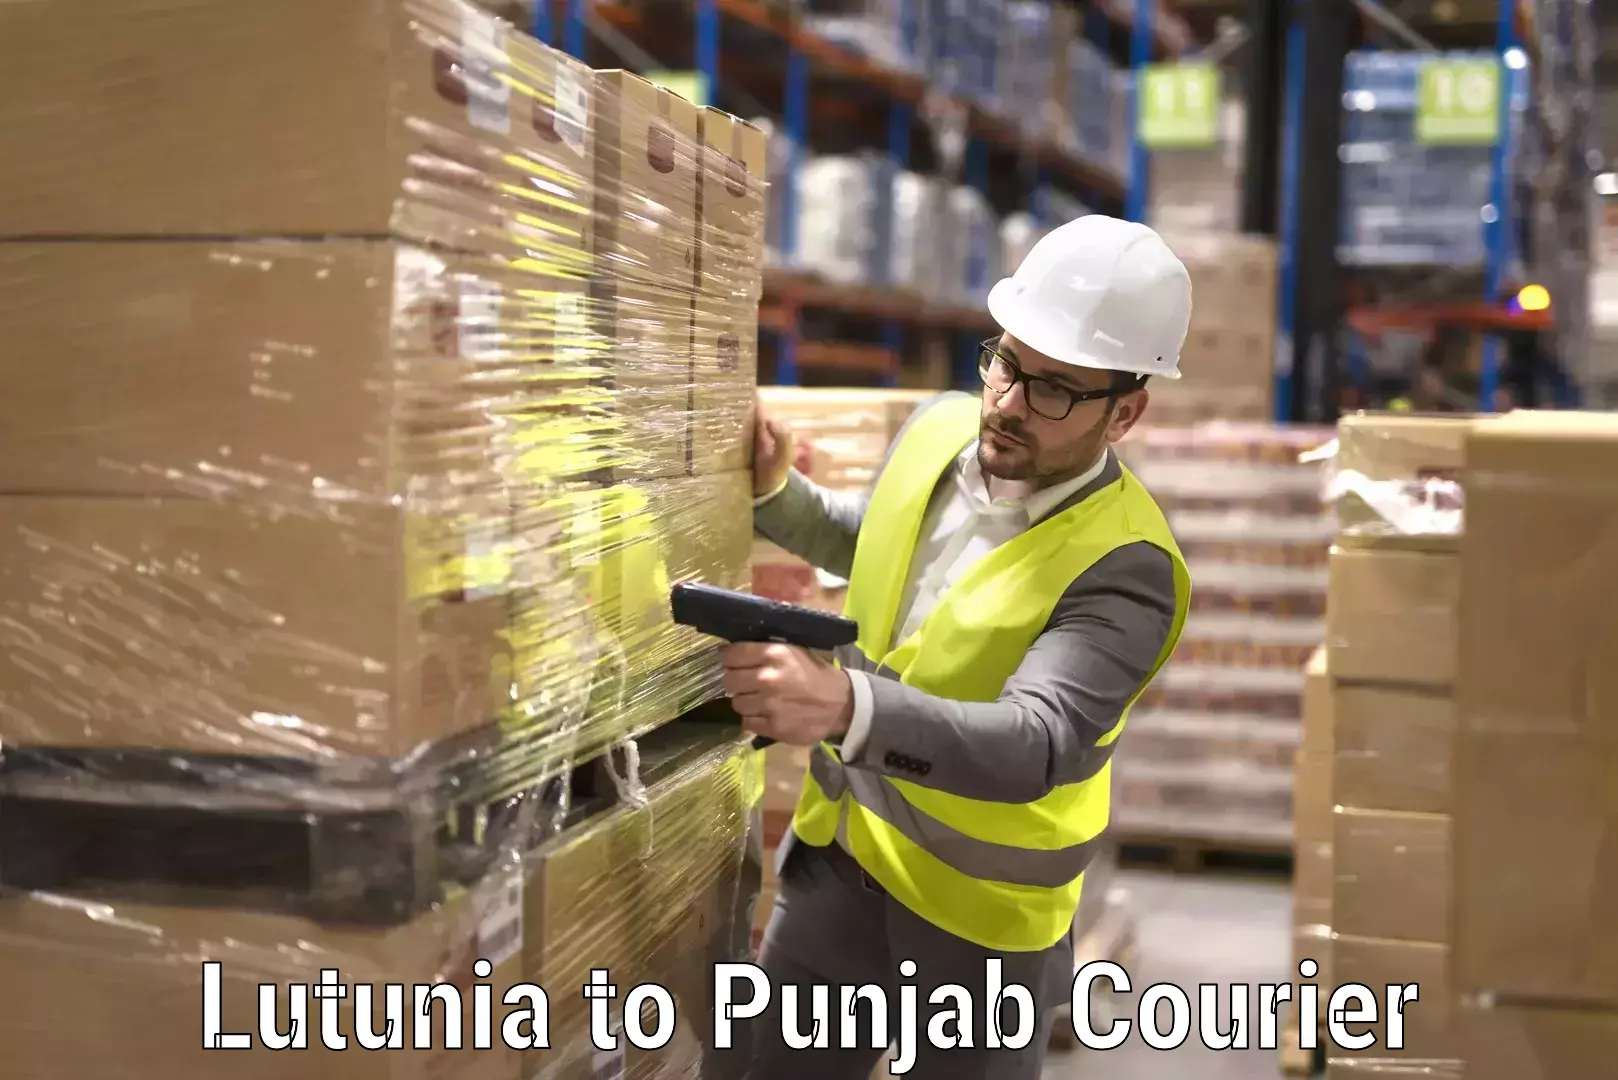 Furniture transport specialists in Lutunia to Punjab